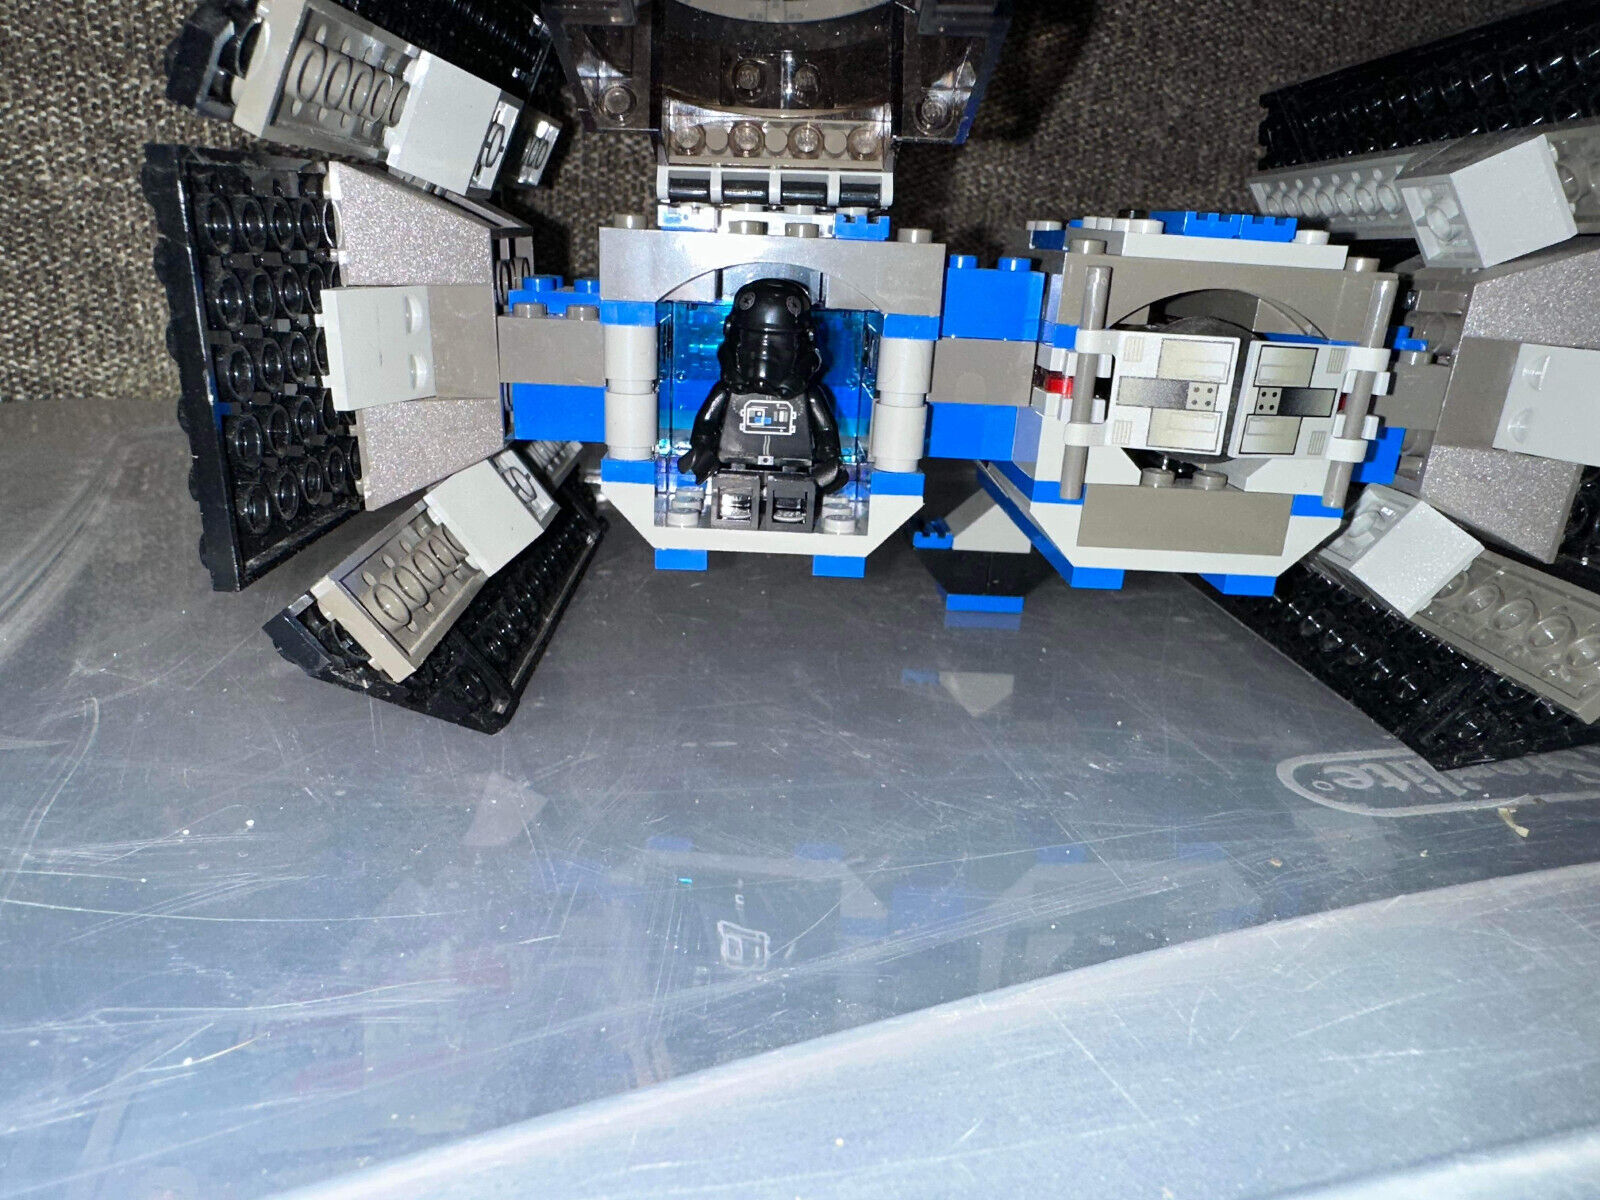 Lego 10131 TIE Fighter Collection - 2004 - Near Complete!